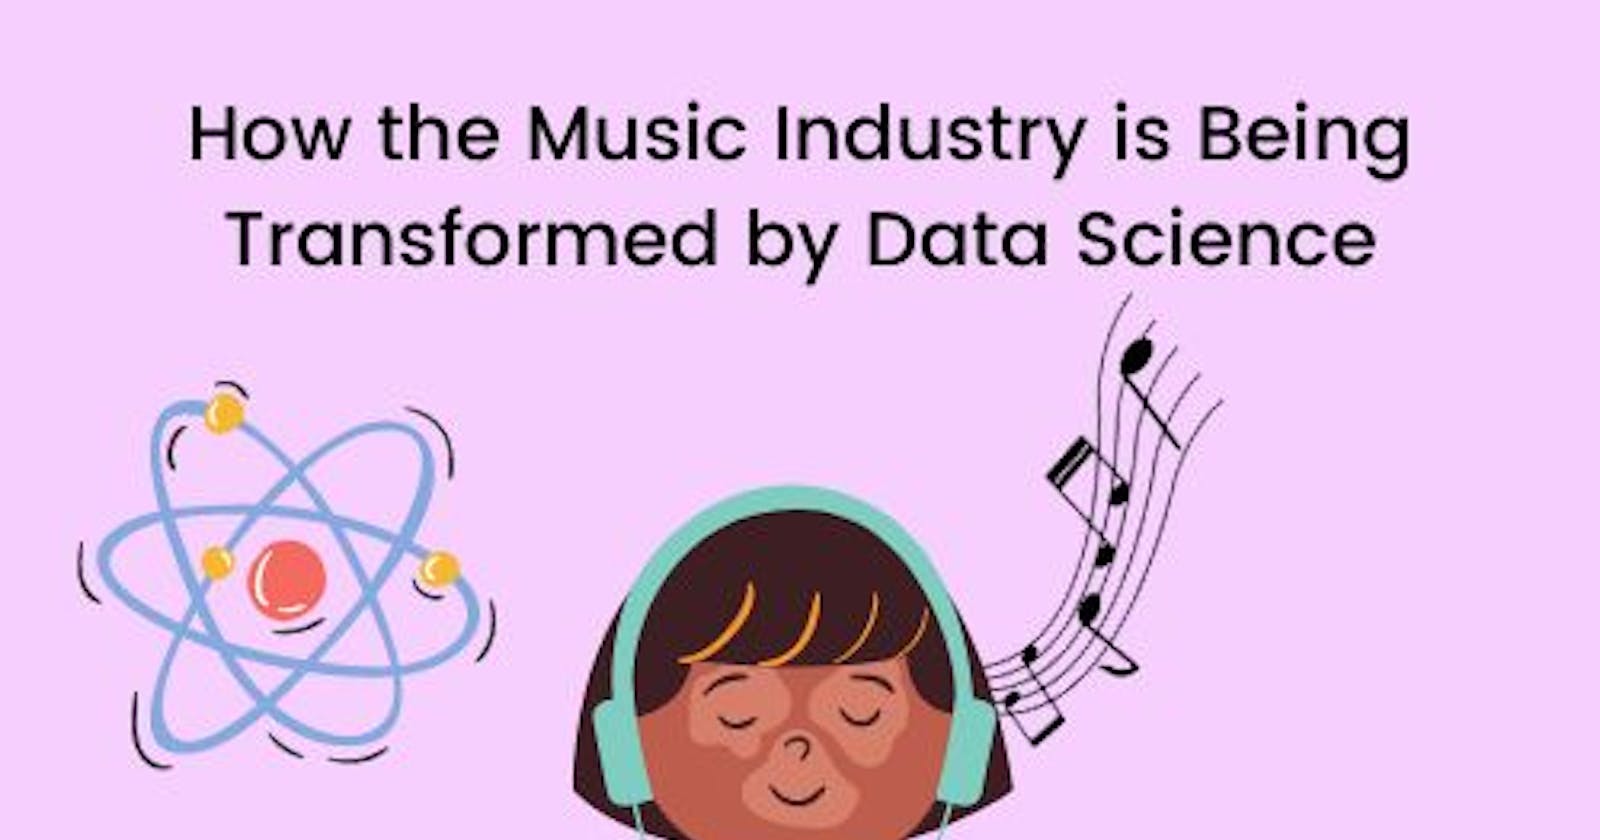 How Data Science is Transforming the Music Industry